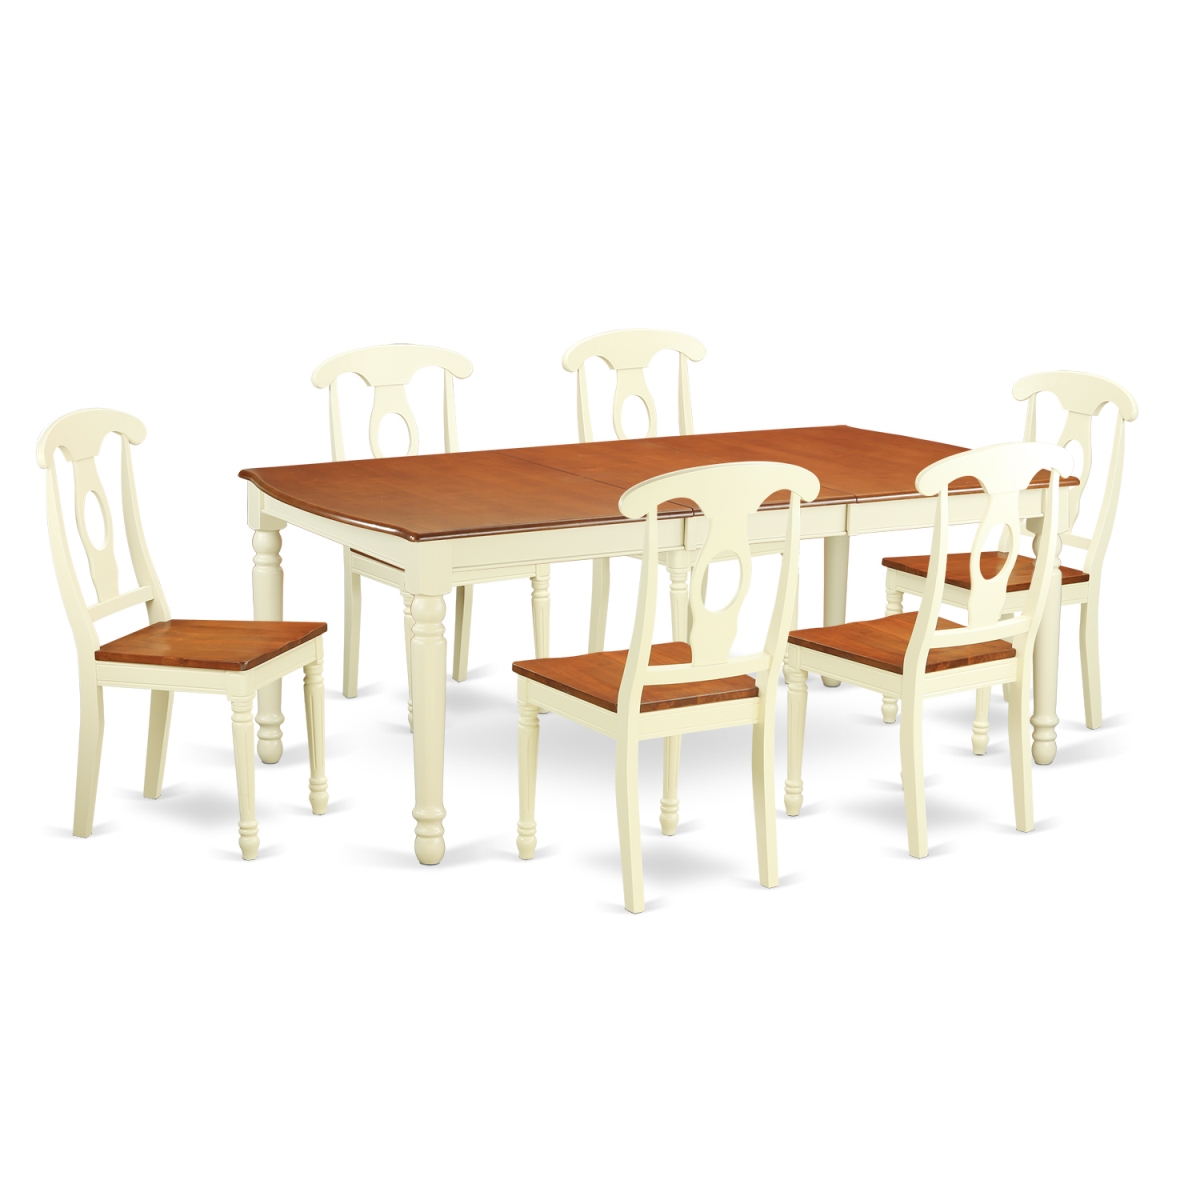 Dinette Set With 6 Table & 6 Chairs, Buttermilk & Cherry - 7 Piece